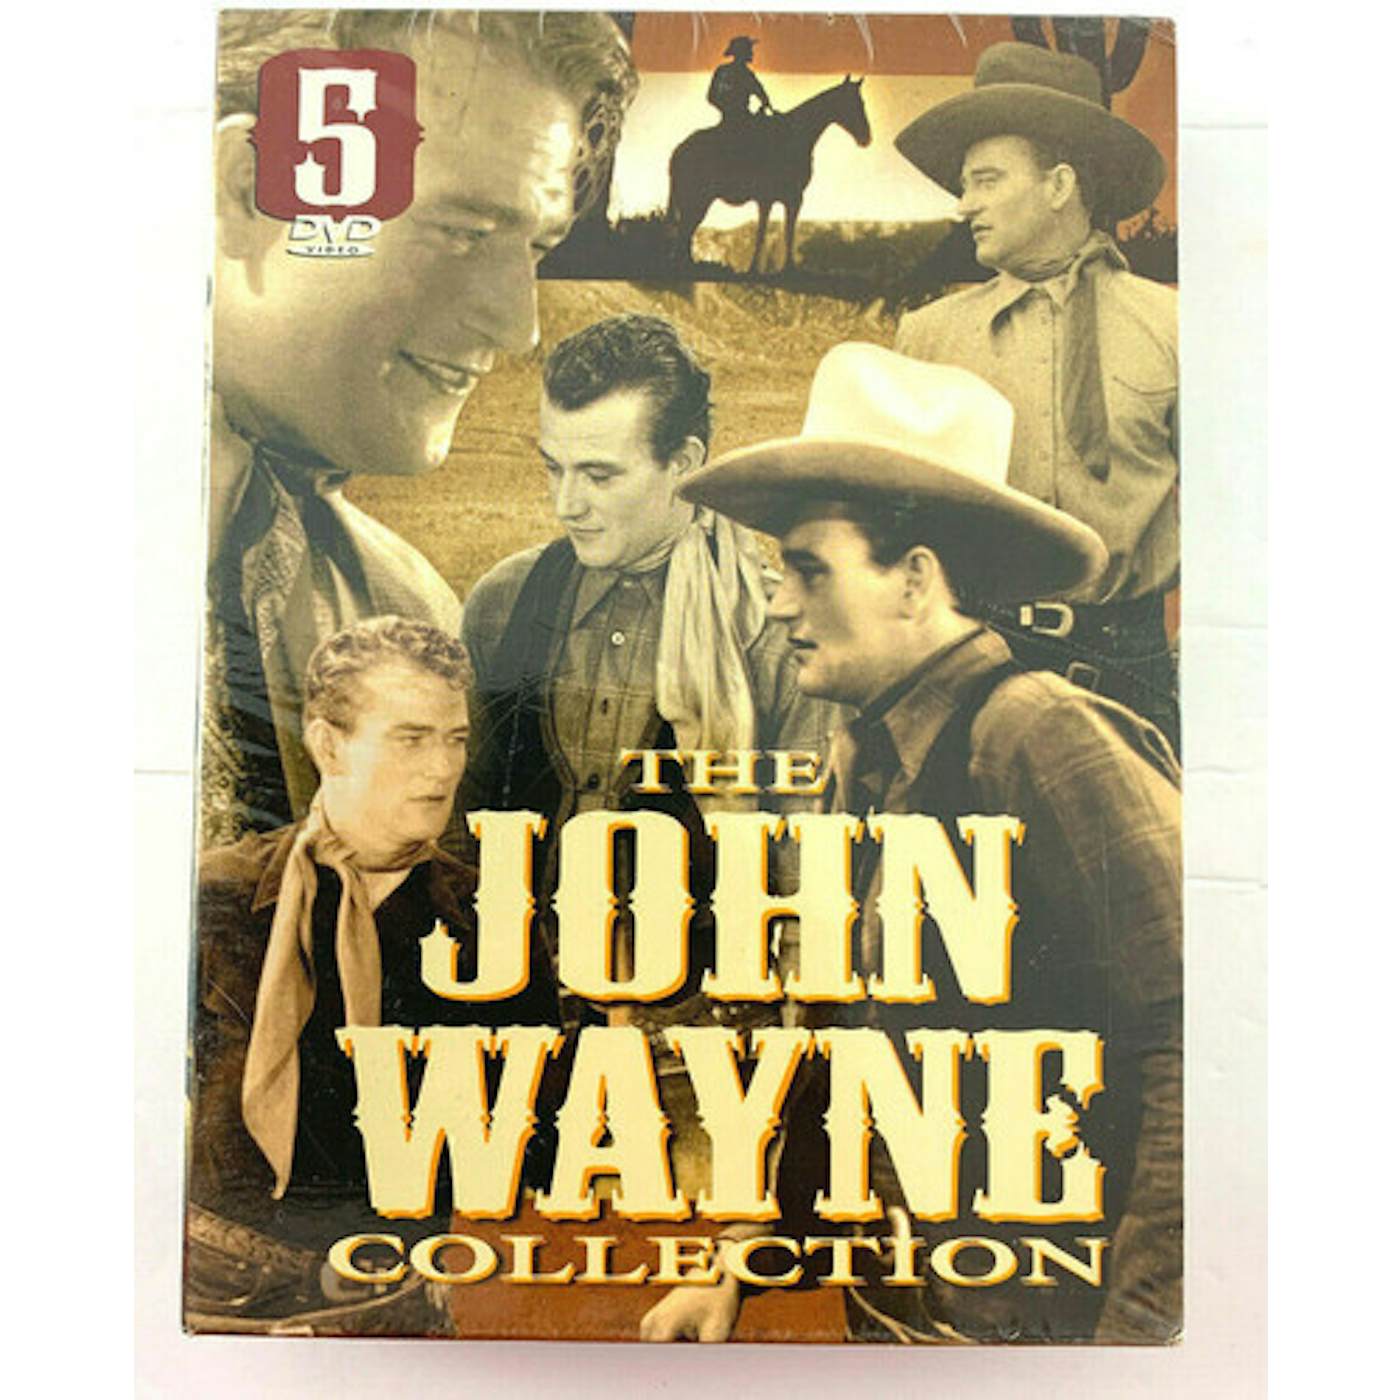 The Collection DVD